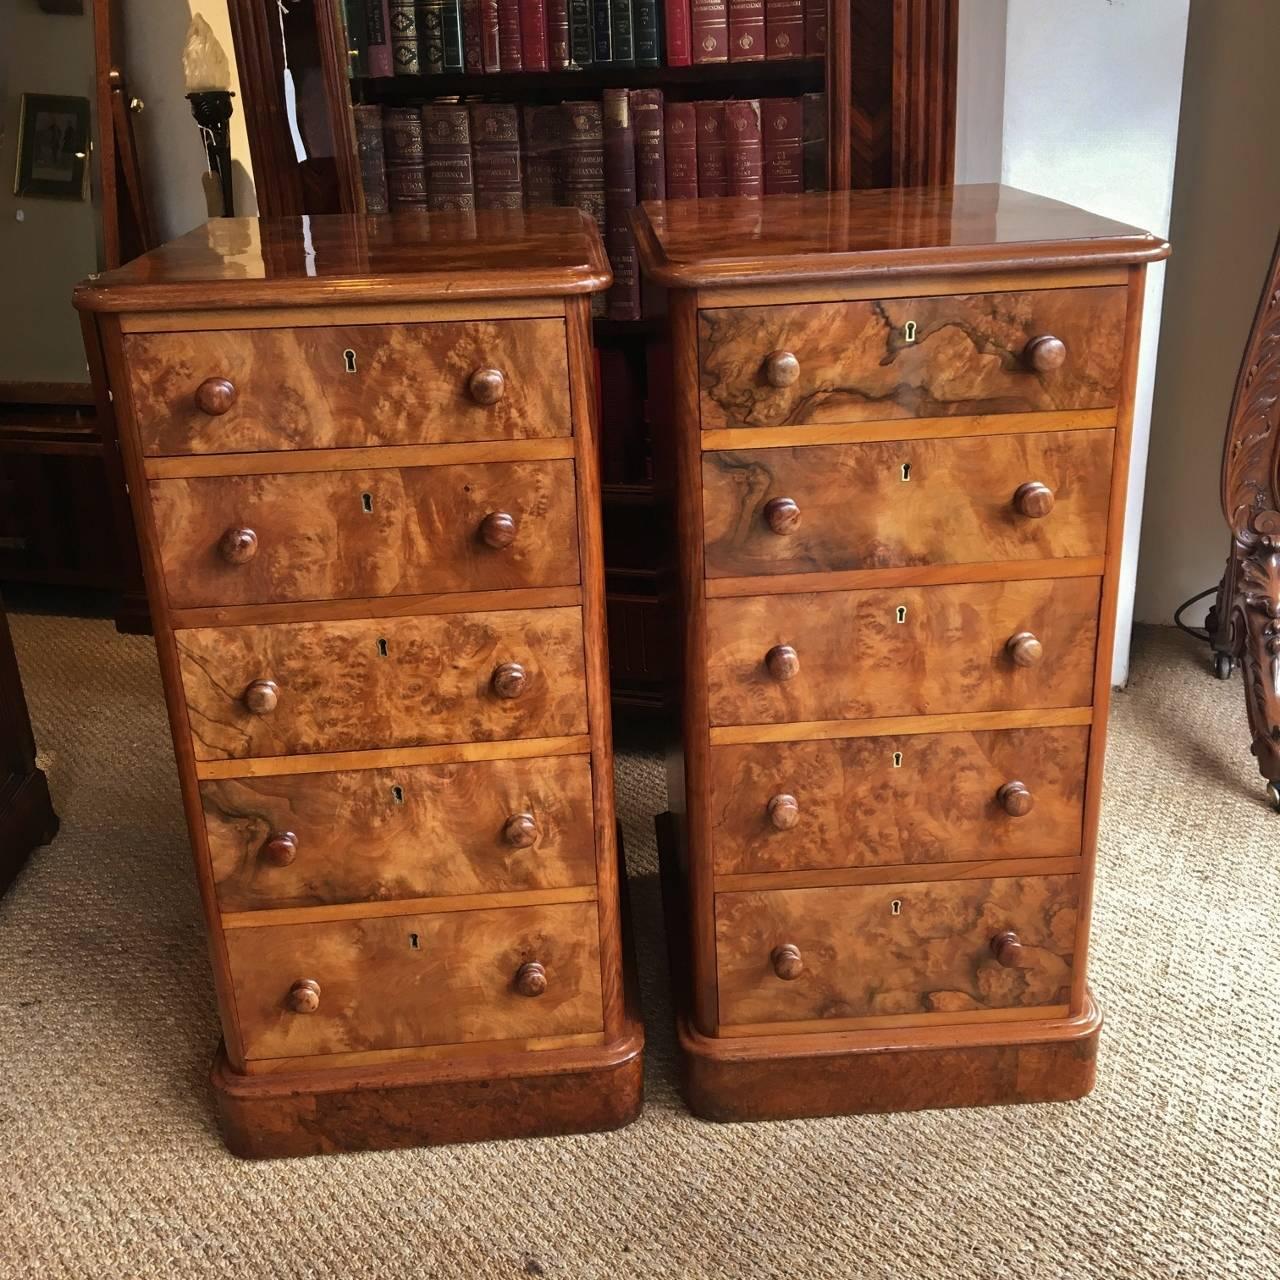 A most attractive pair of antique figured walnut bedside cabinets, circa 1860

These cabinets were made by skilled craftsmen with solid ash drawer linings and hand cut dovetails. There are five smoothly running drawers in each cabinet all with